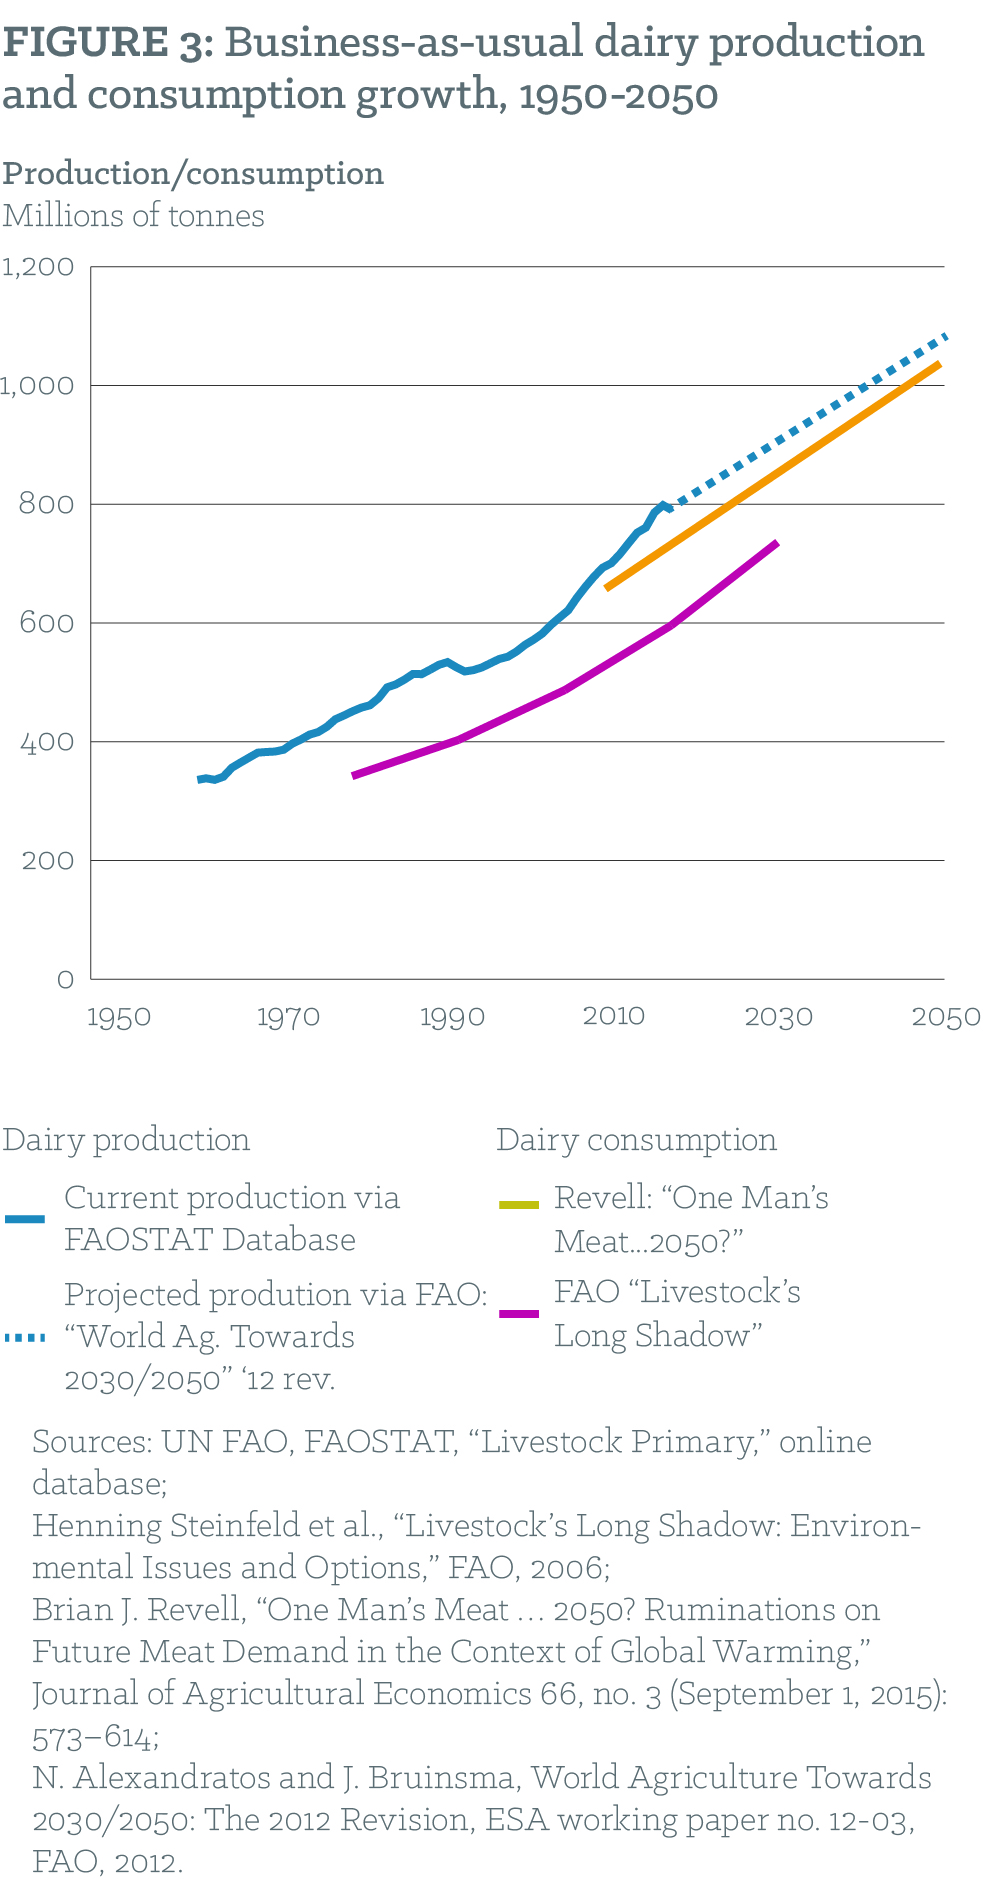 Figure 3: Business-as-usual dairy production and consumption growth, 1950-2050